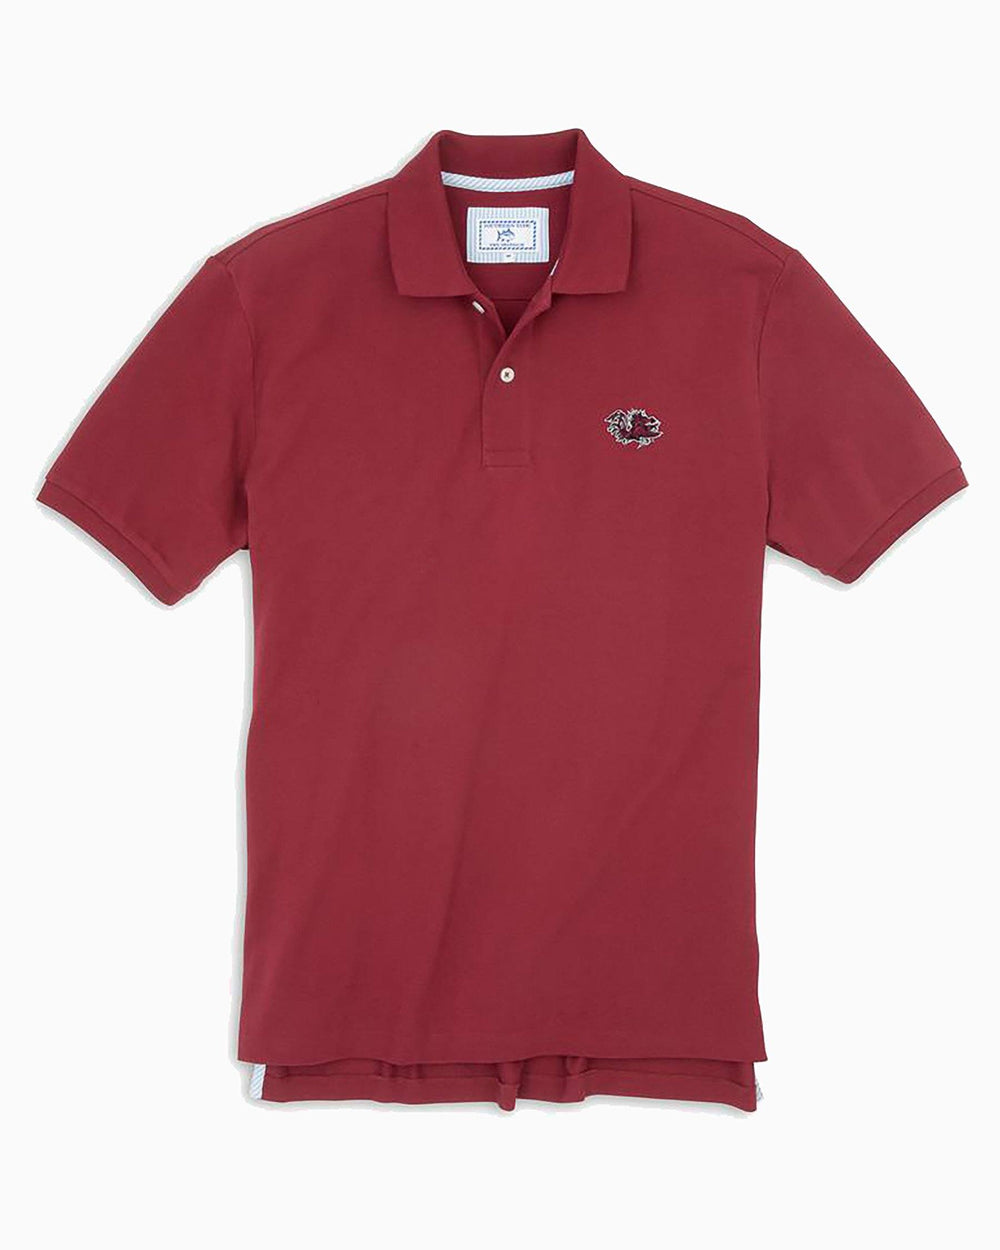 The front view of the Men's Red USC Gamecocks Pique Polo Shirt by Southern Tide - Chianti